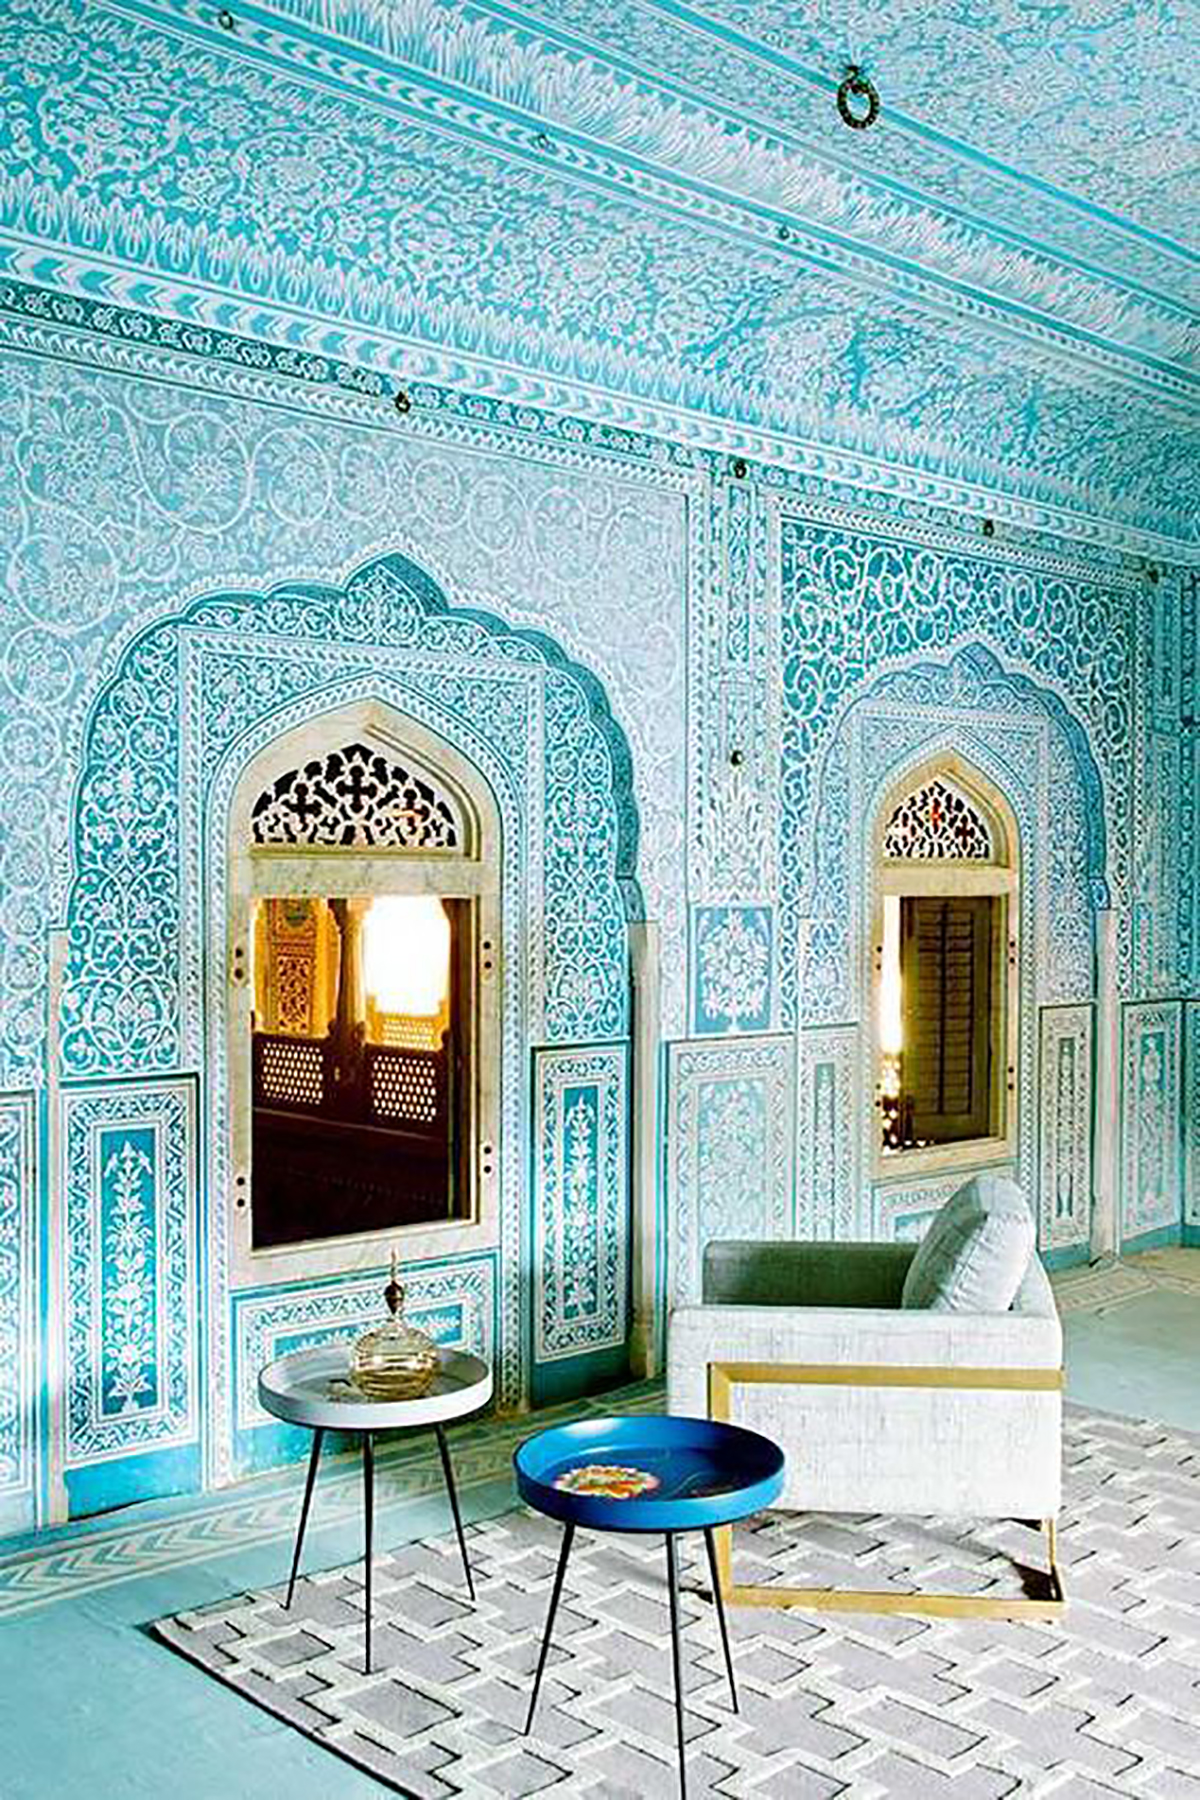 Samode Palace in Jaipur, India India is truly exploding with color, and no architecture captures it quite like the ornate Samode Palace in Jaipur, which also happens to be a hotel. Win win.